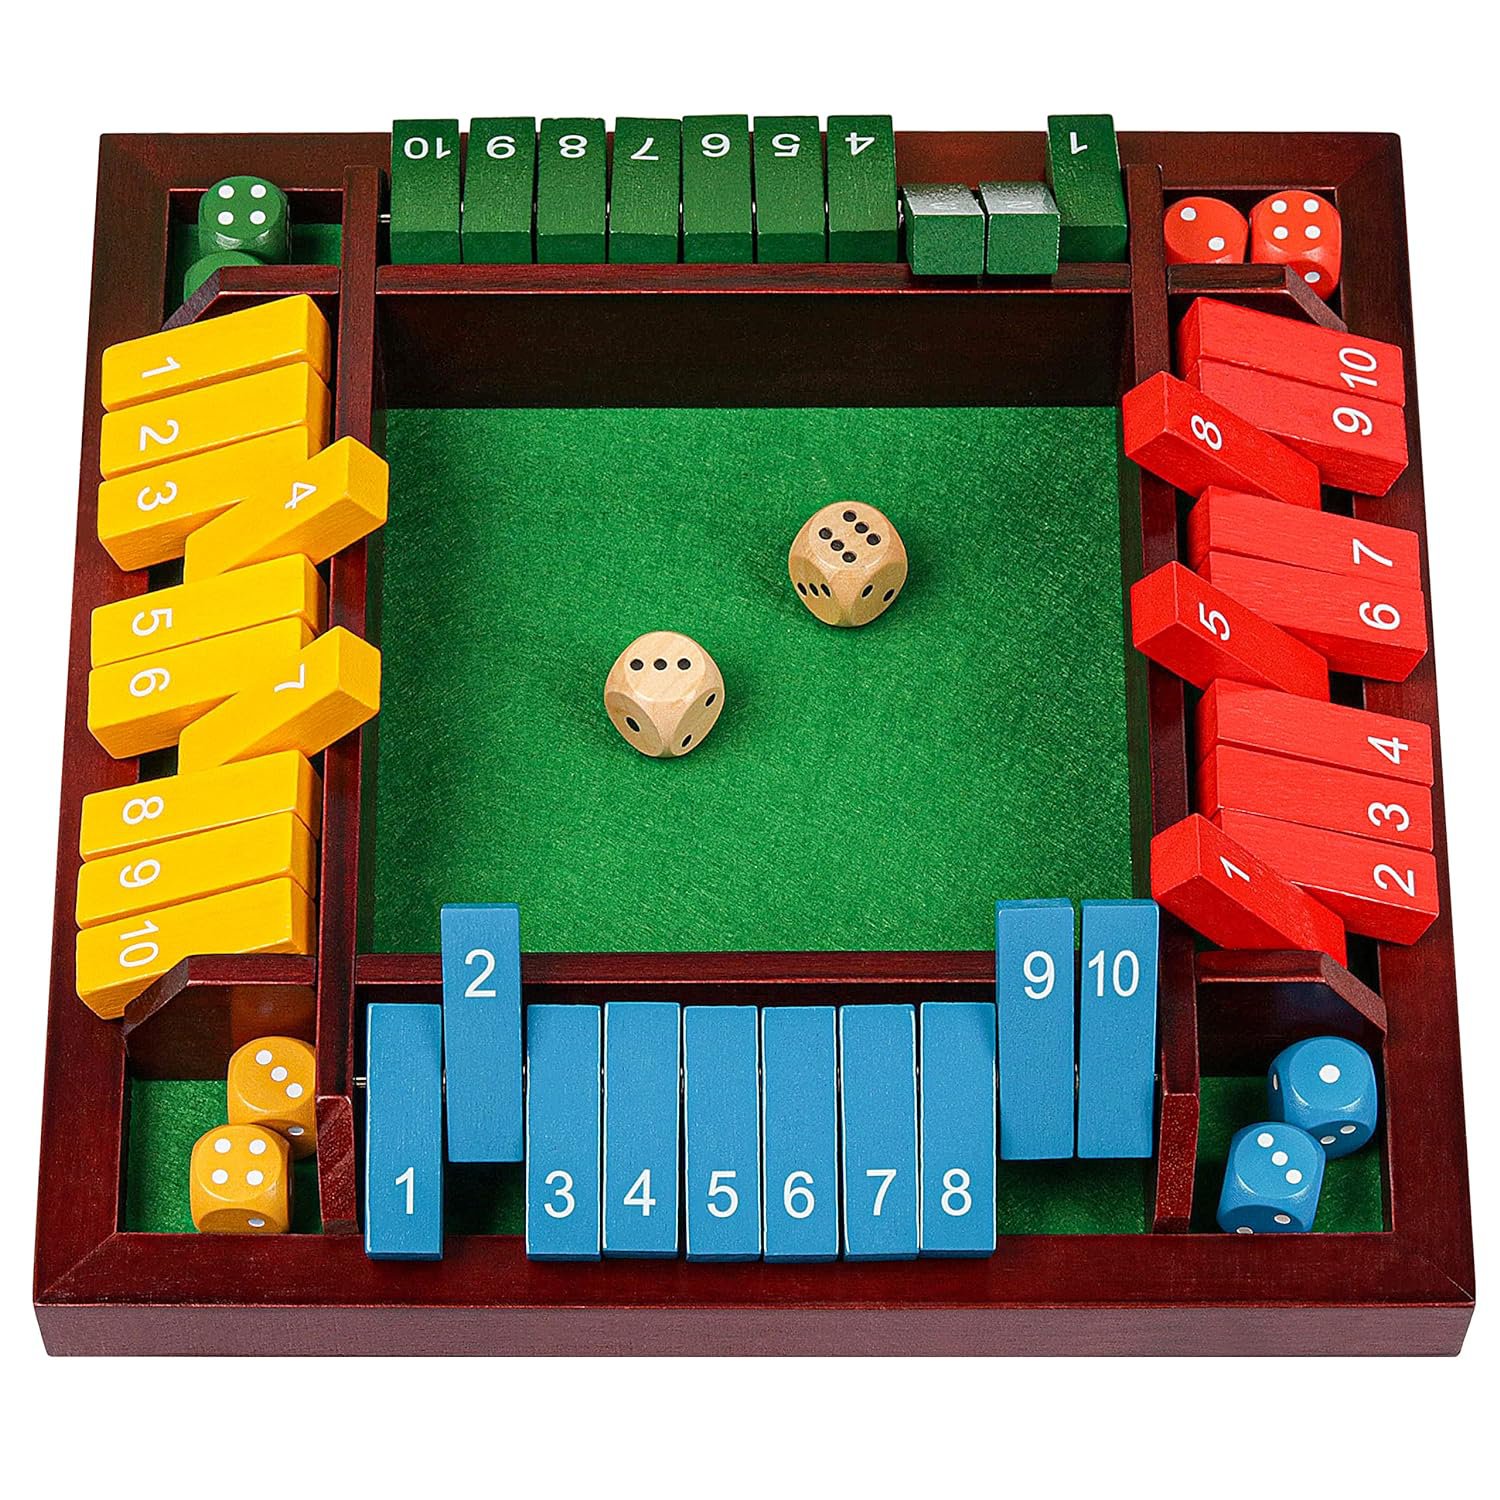 Shut The Box Dice Game Wooden Board Math Number Game Family Pub Bar 1-4 Players With 10 Colored Di